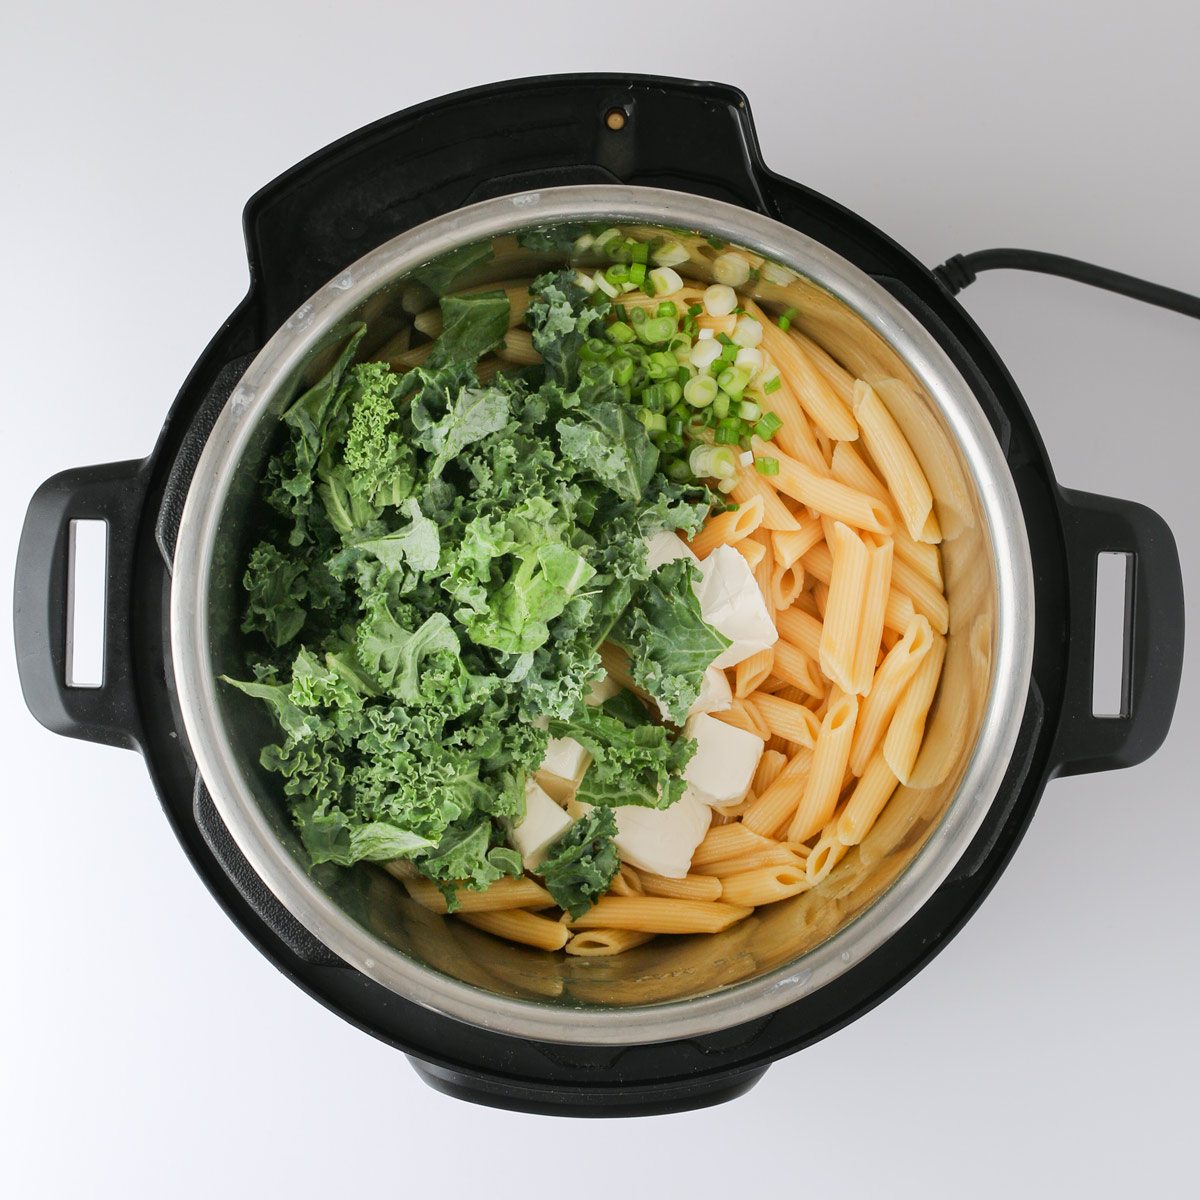 adding cream cheese cubes and chopped kale to cooked pasta in instant pot.